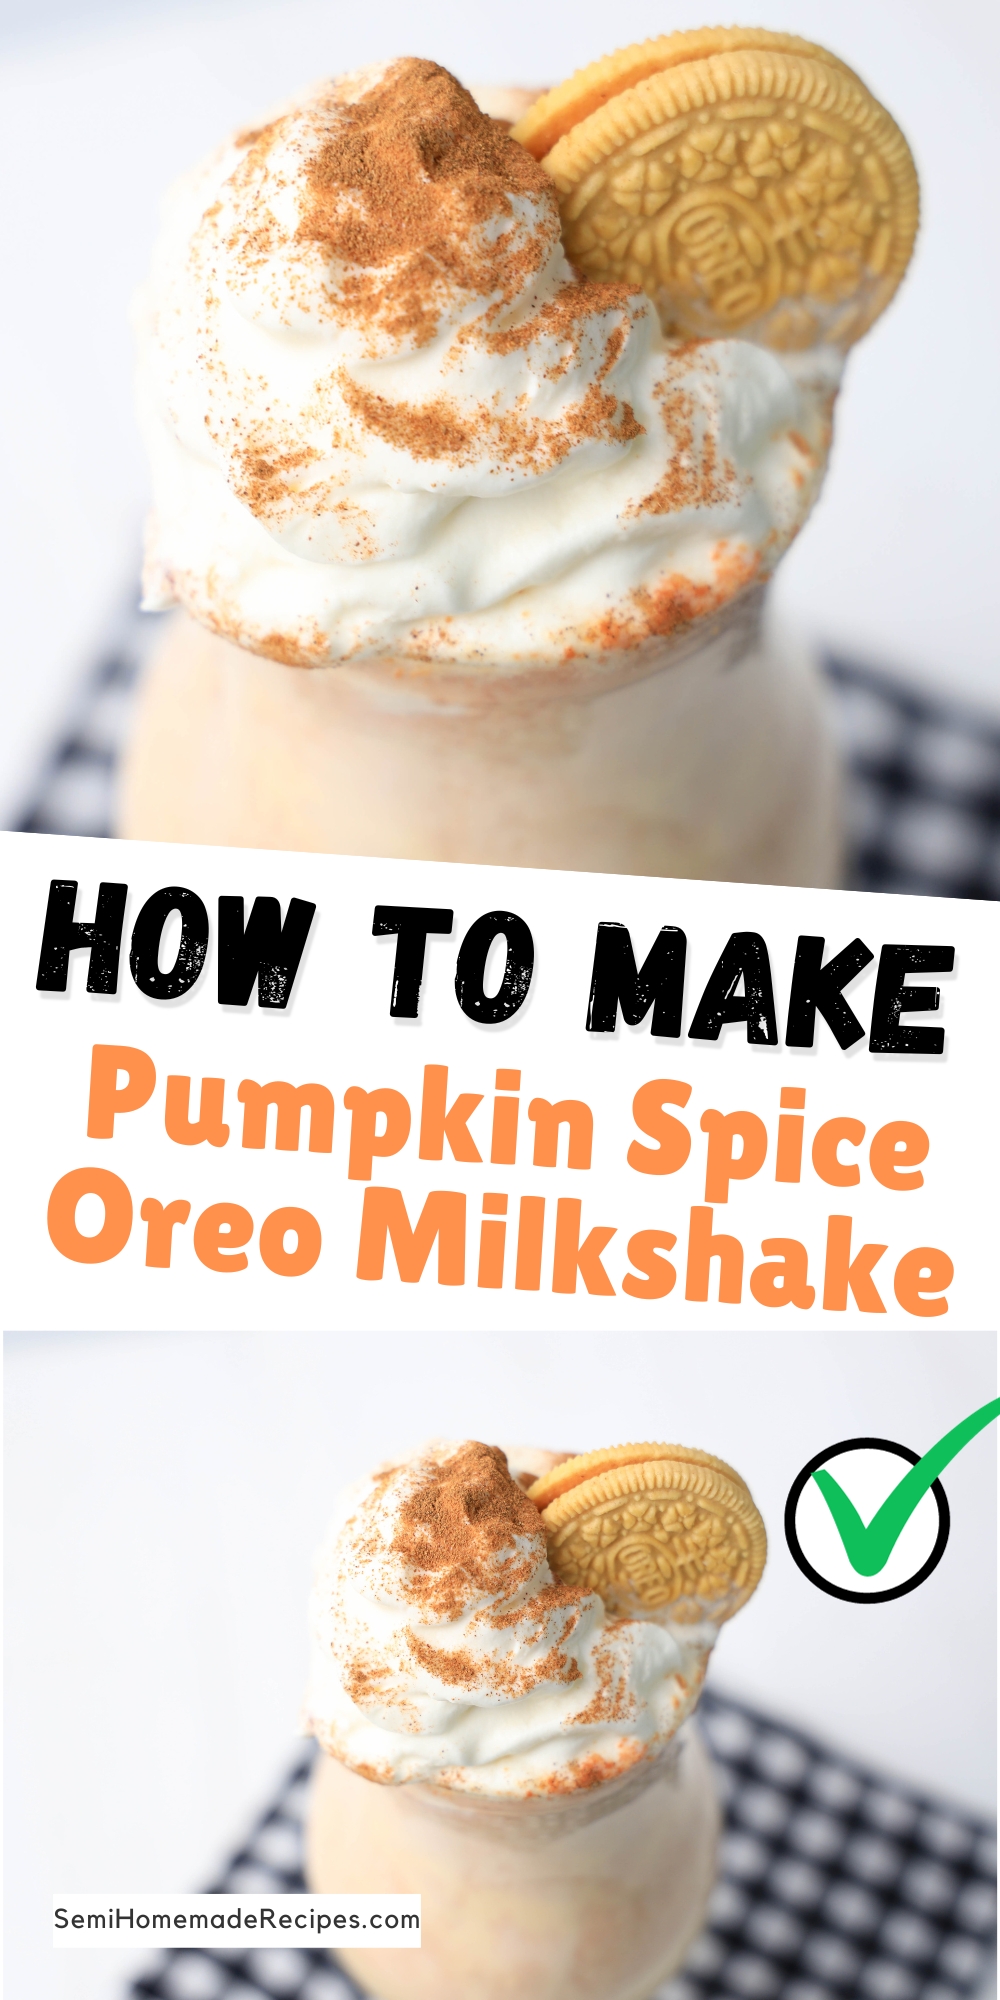 Autumn and Summer collide with this Pumpkin Spice Oreo Milkshake! We're using Pumpkin Spice Oreos and Vanilla Ice Cream to make a cool treat with great fall flavor! 